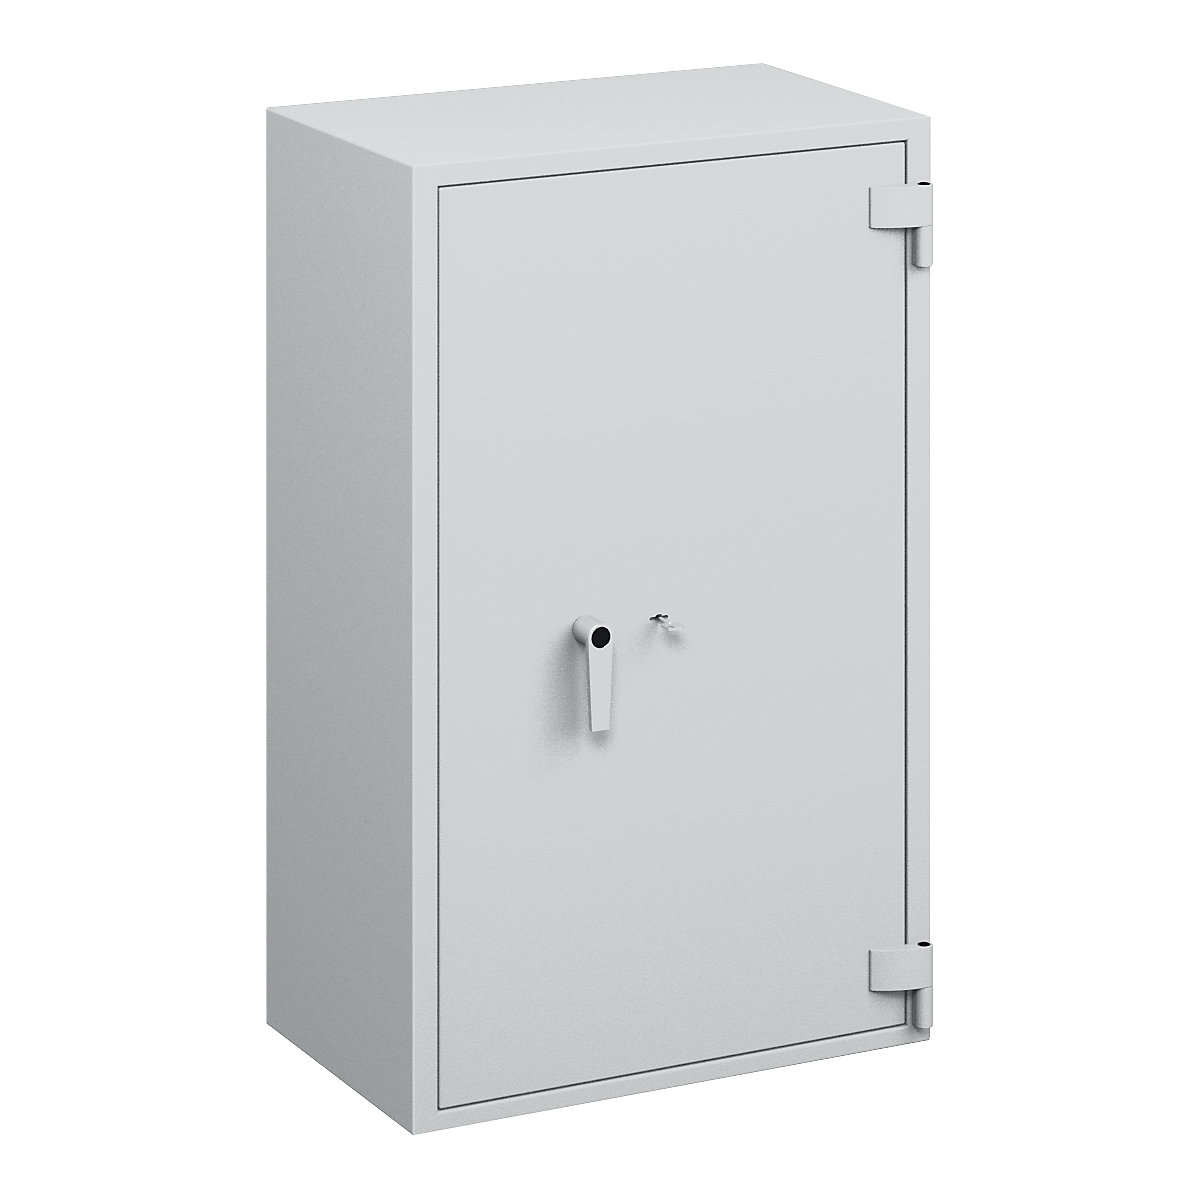 Fire resistant safety cabinet, VDMA B, S2, S 60 P, HxWxD 1137 x 704 x 471 mm-7